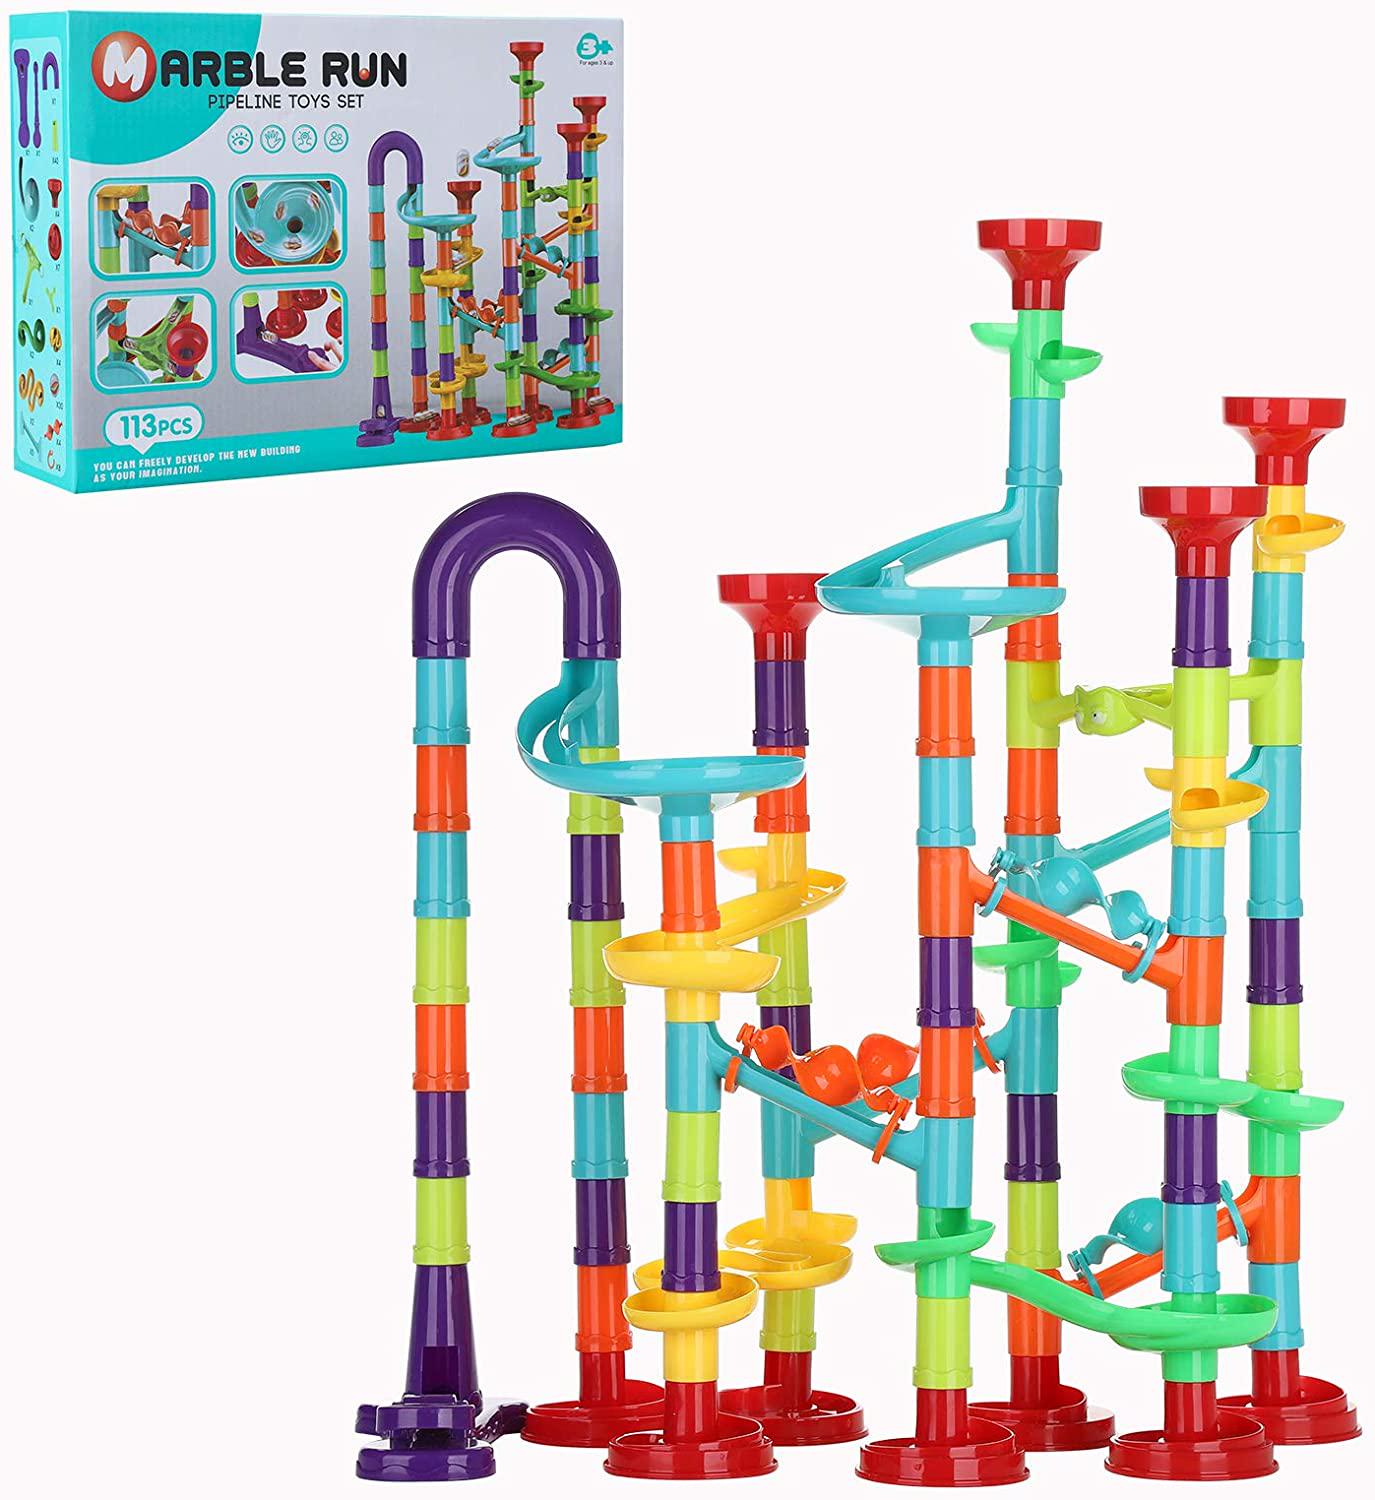 KSDFJ, KSDFJ Marble Run Set for Kids 113pcs Marble Track Building Games 83 Marbulous Pieces 30 Glass Marble Colorful Marble Maze Race Track Construction Toys Learning Educational Fun for Boys 3+ Years Old